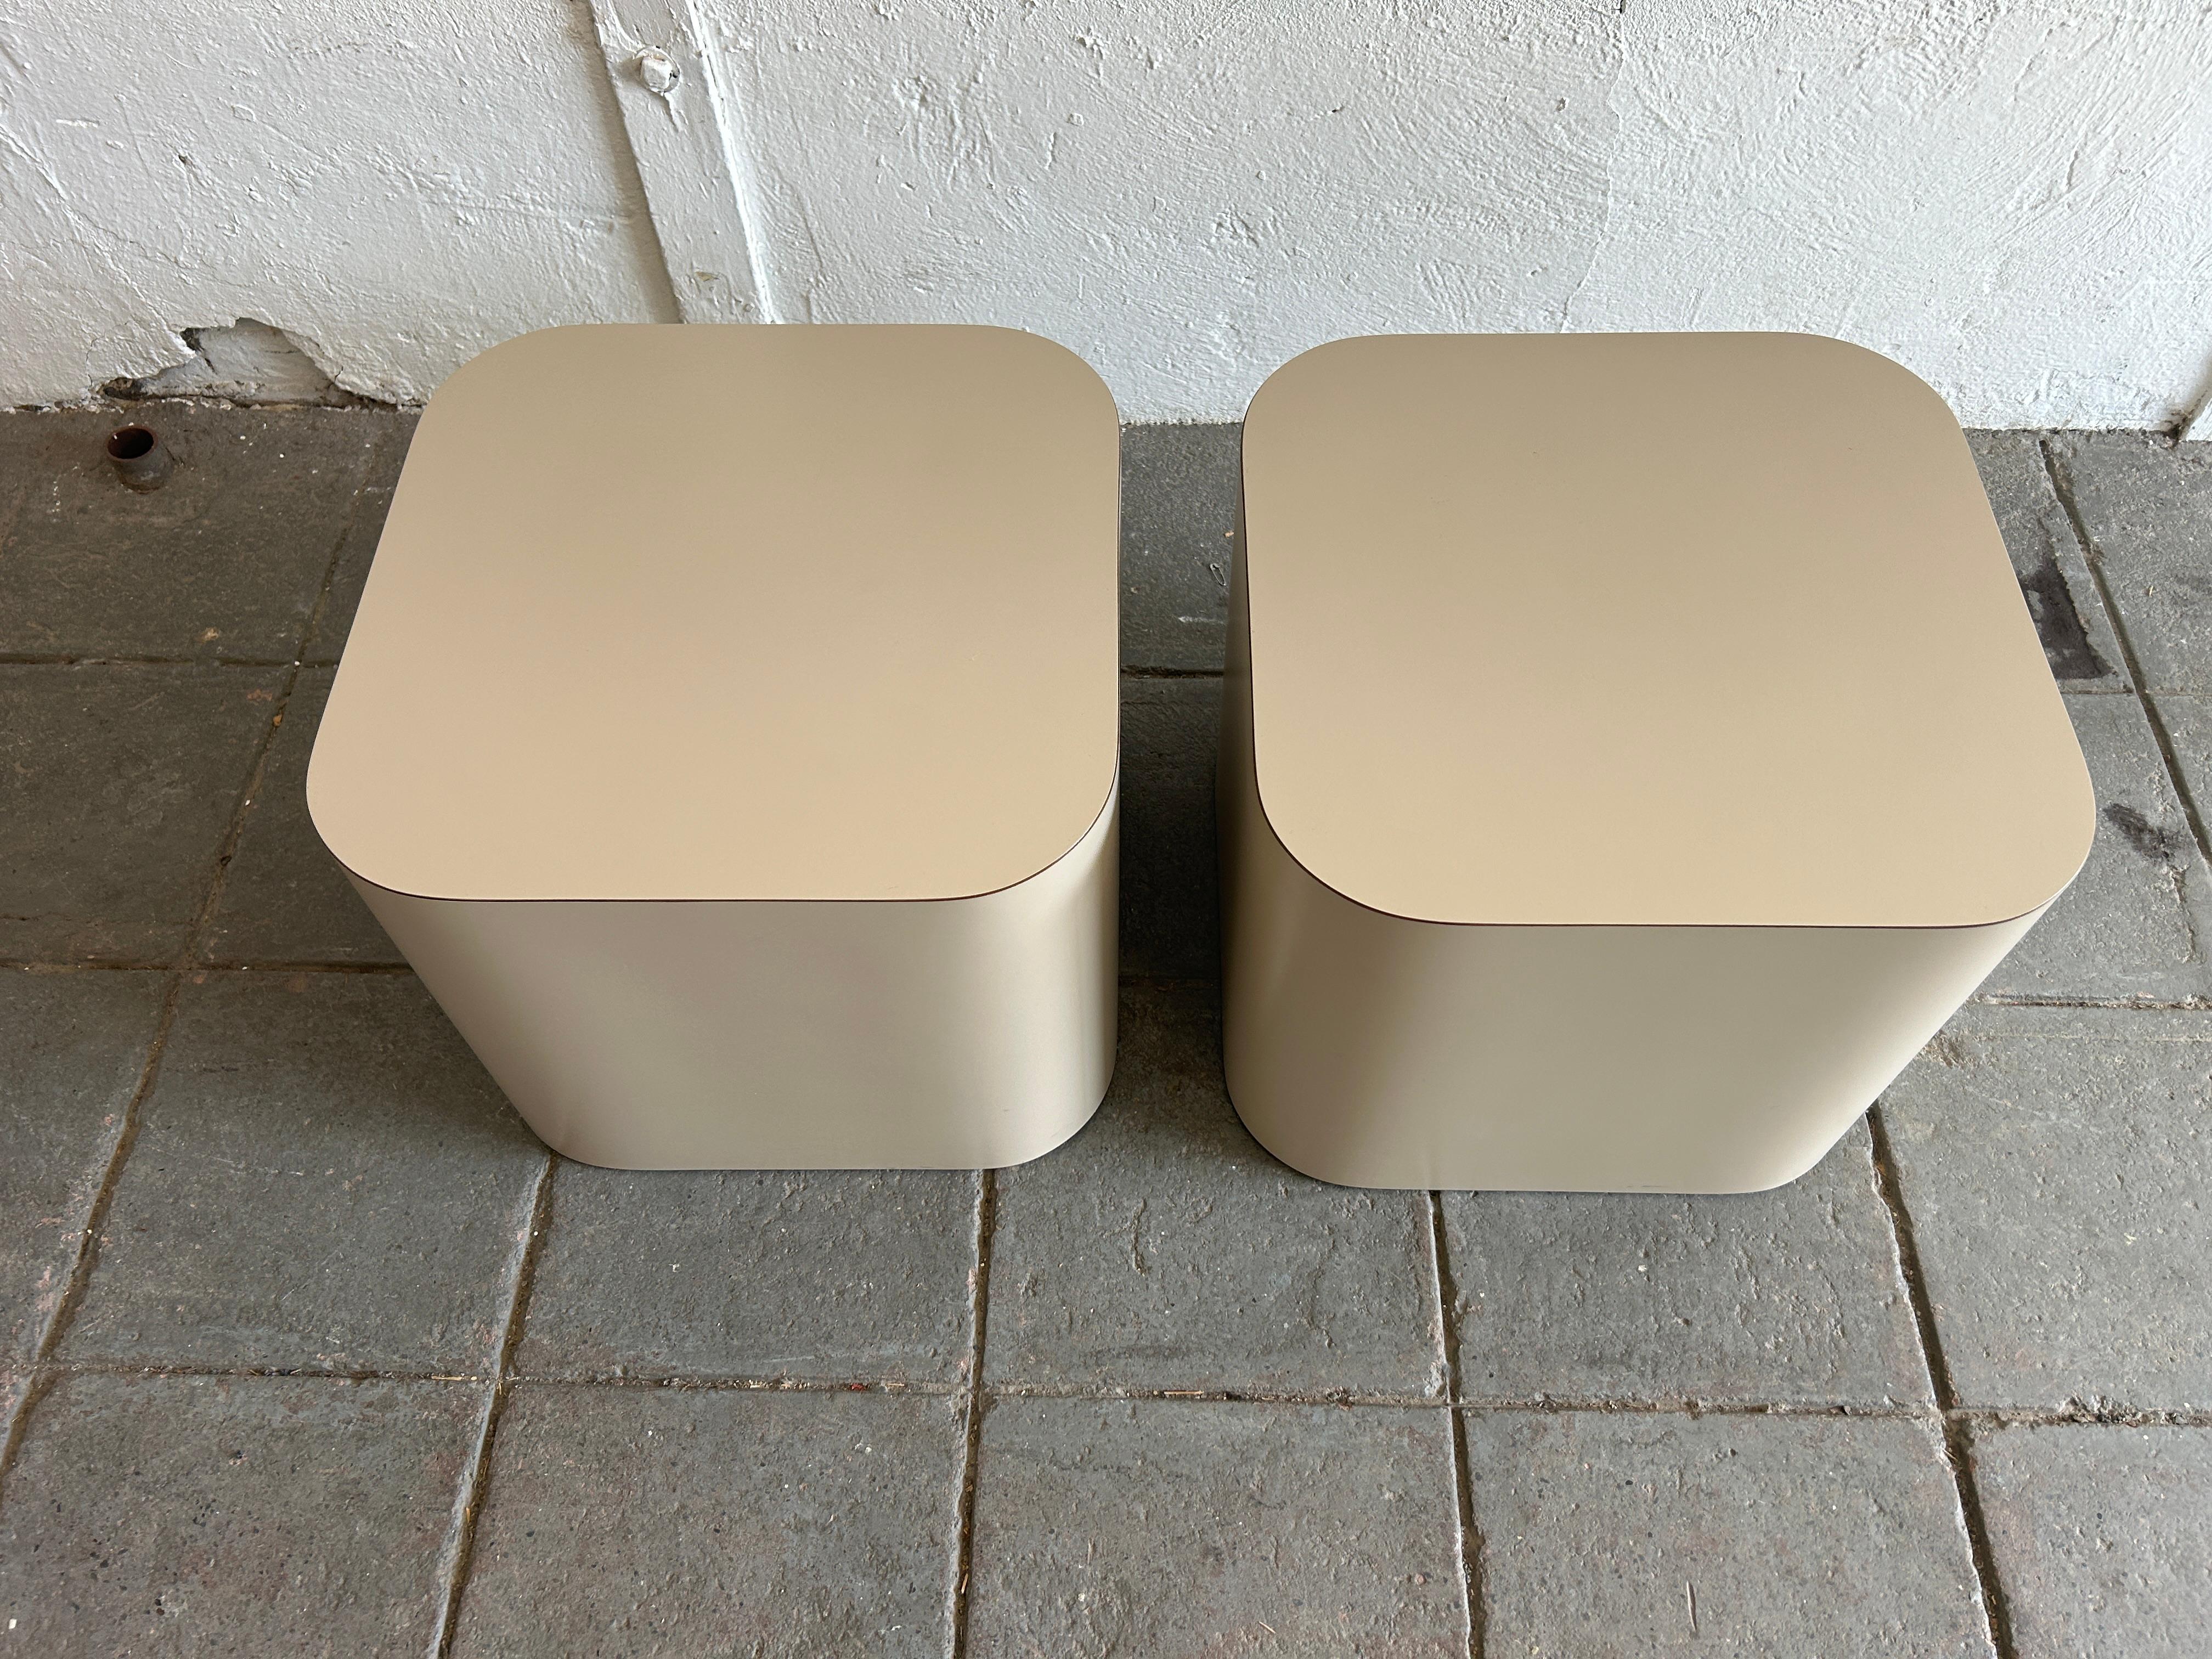 Pair Post modern taupe tan matte laminate rounded corners square end tables. In the style of Karl Springer. Very clean set. No chips or scratches. Circa 1980. Located in Williamsburg Brooklyn NYC.

Sold as a pair (2) 

Each table measures 18” x 18”